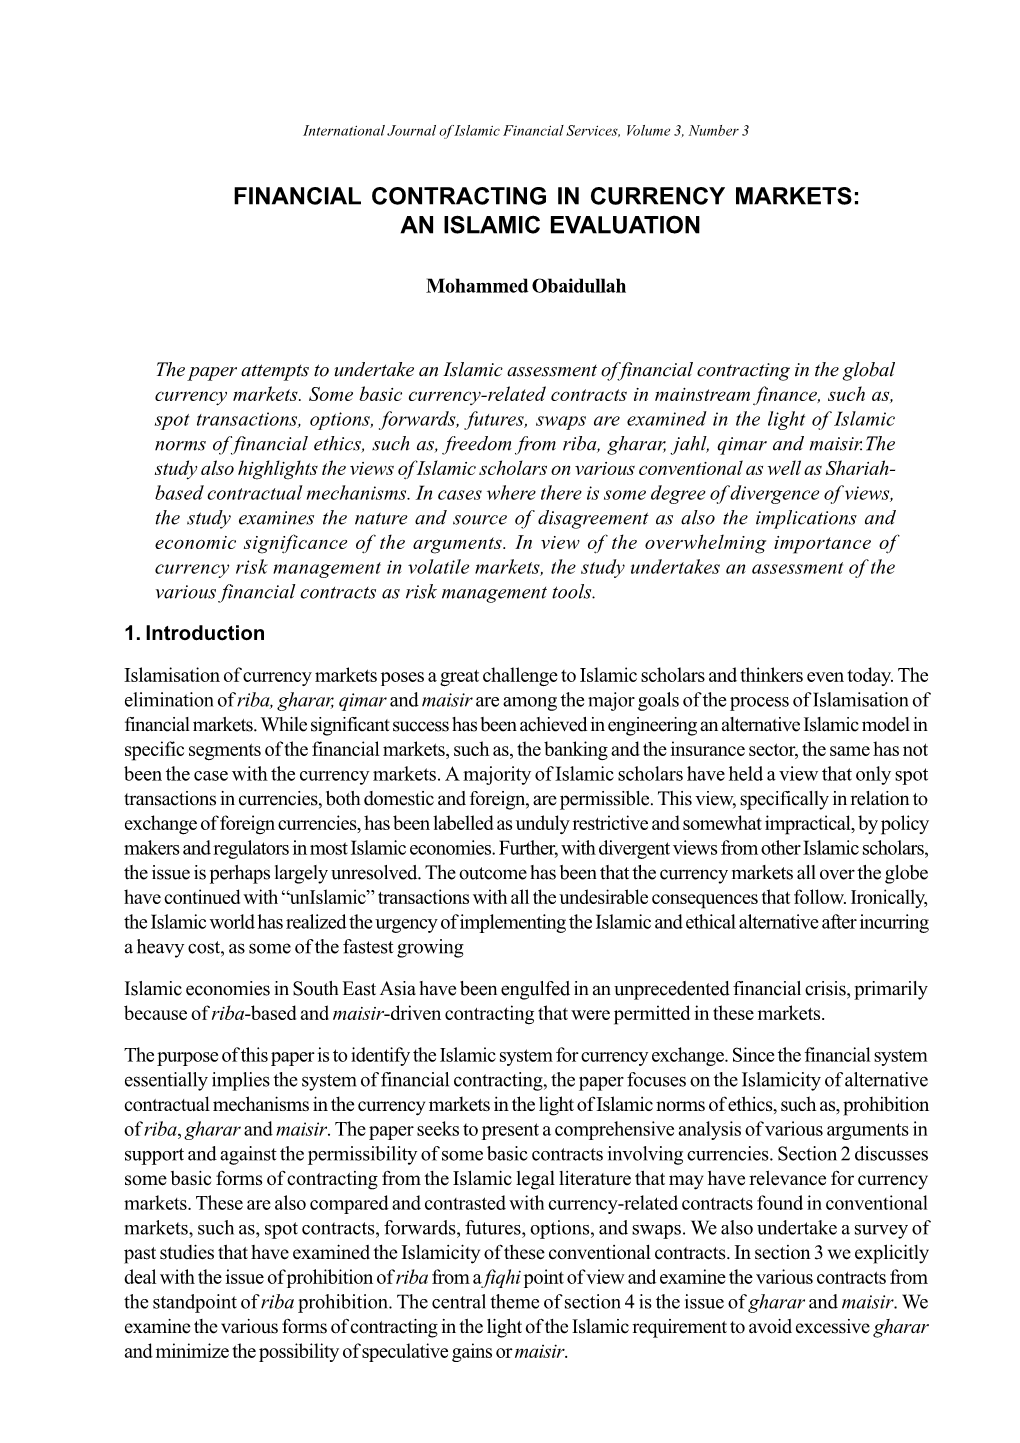 Financial Contracting in Currency Markets: an Islamic Evaluation